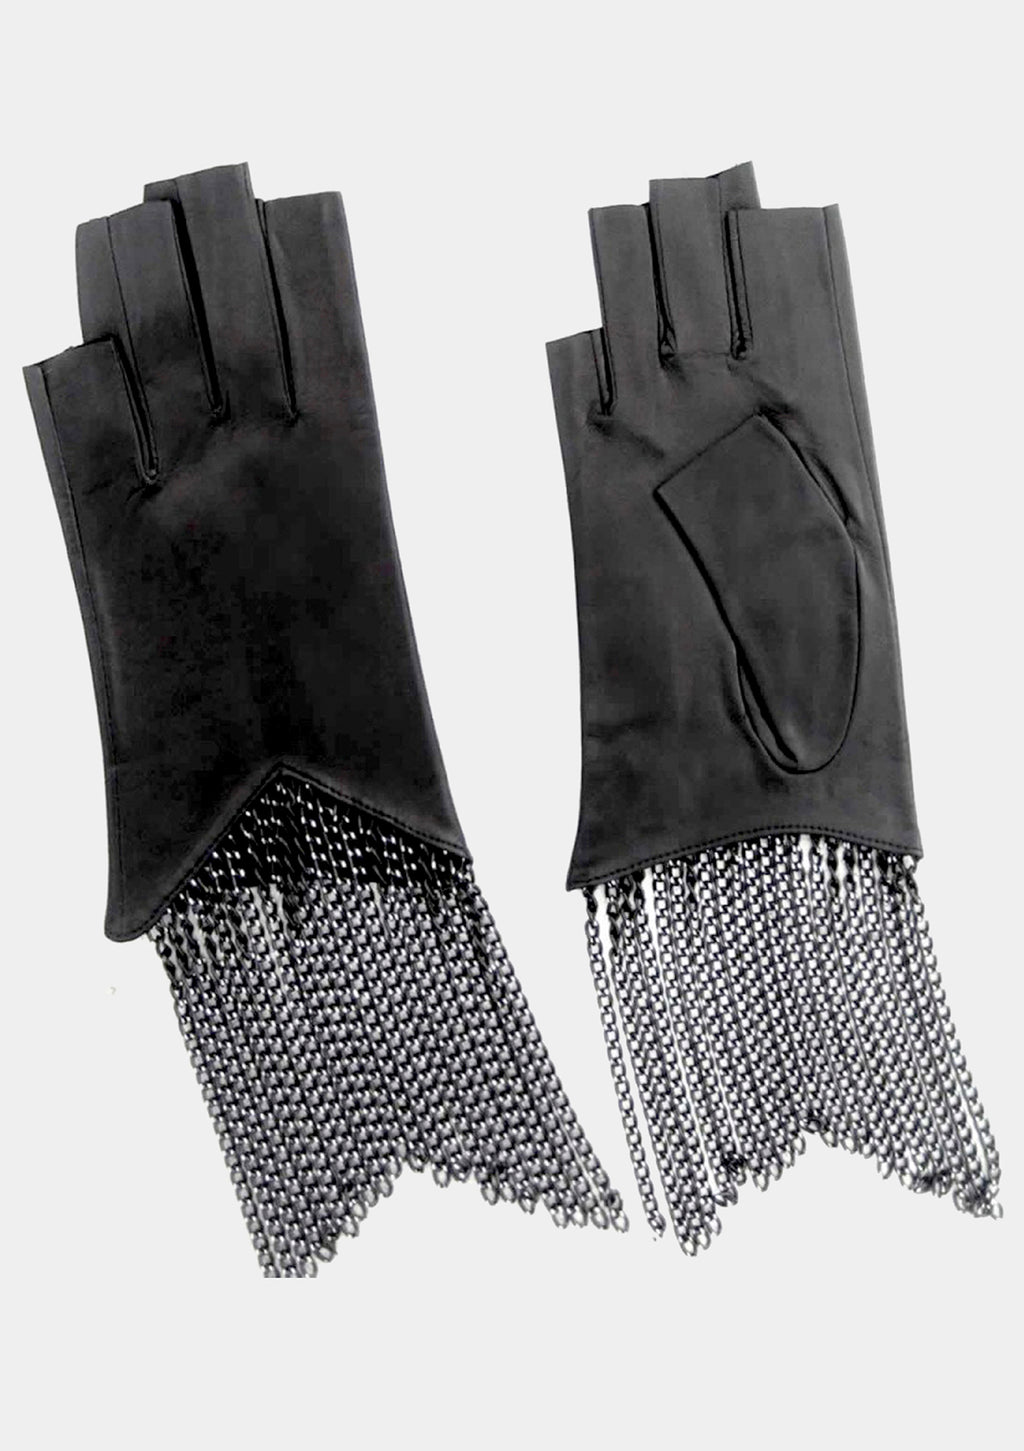 Black Leather Fingerless Leather Gloves - Best Price in Singapore